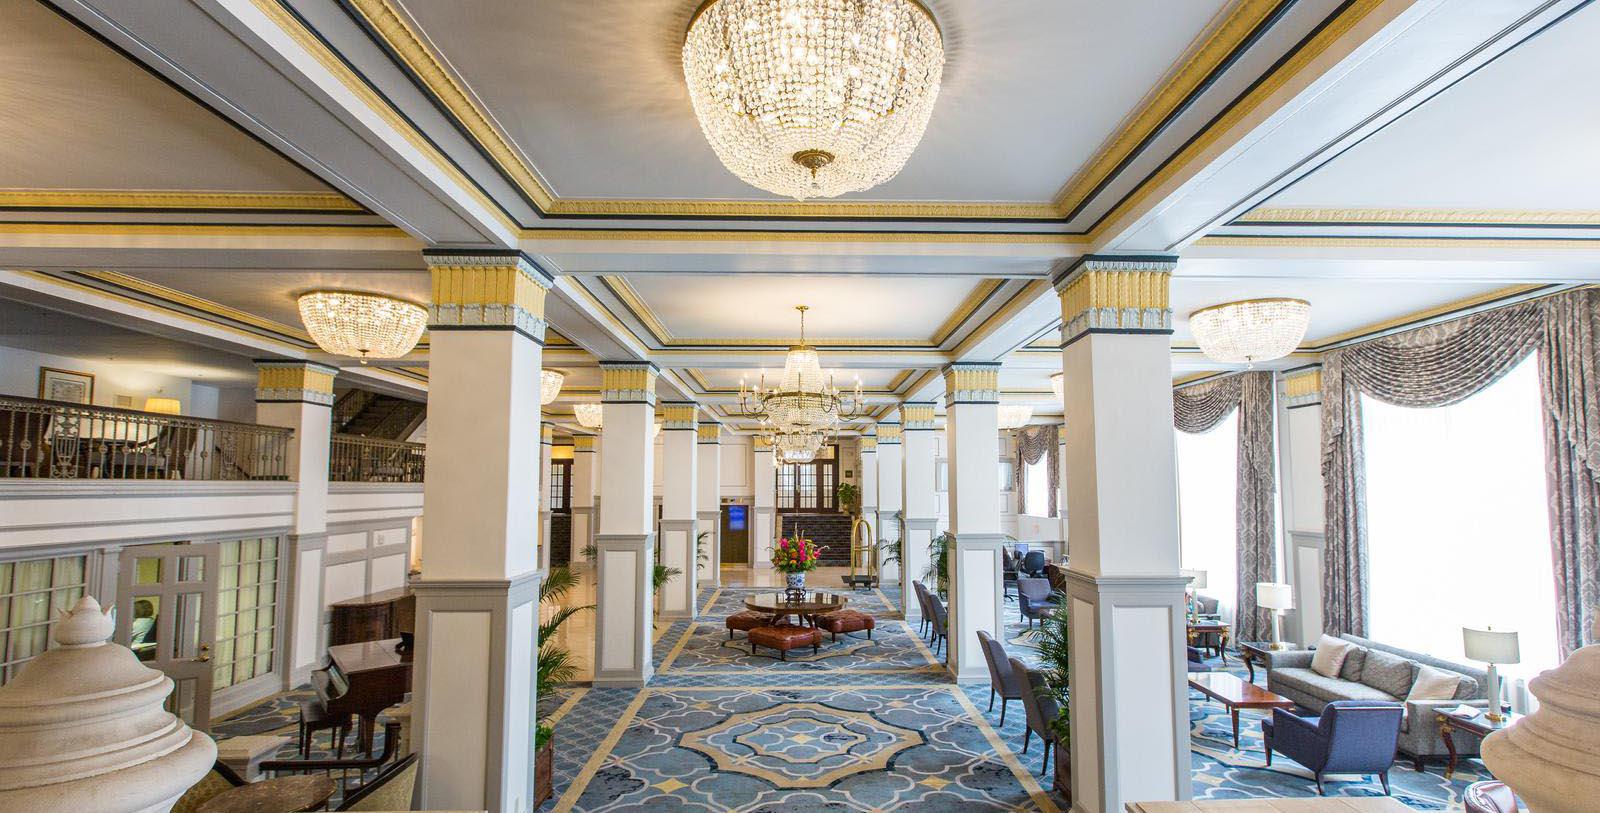 Image of hotel lobby at Francis Marion Hotel, 1924, Member of Historic Hotels of America, in Charleston, South Carolina, Special Offers, Discounted Rates, Families, Romantic Escape, Honeymoons, Anniversaries, Reunions